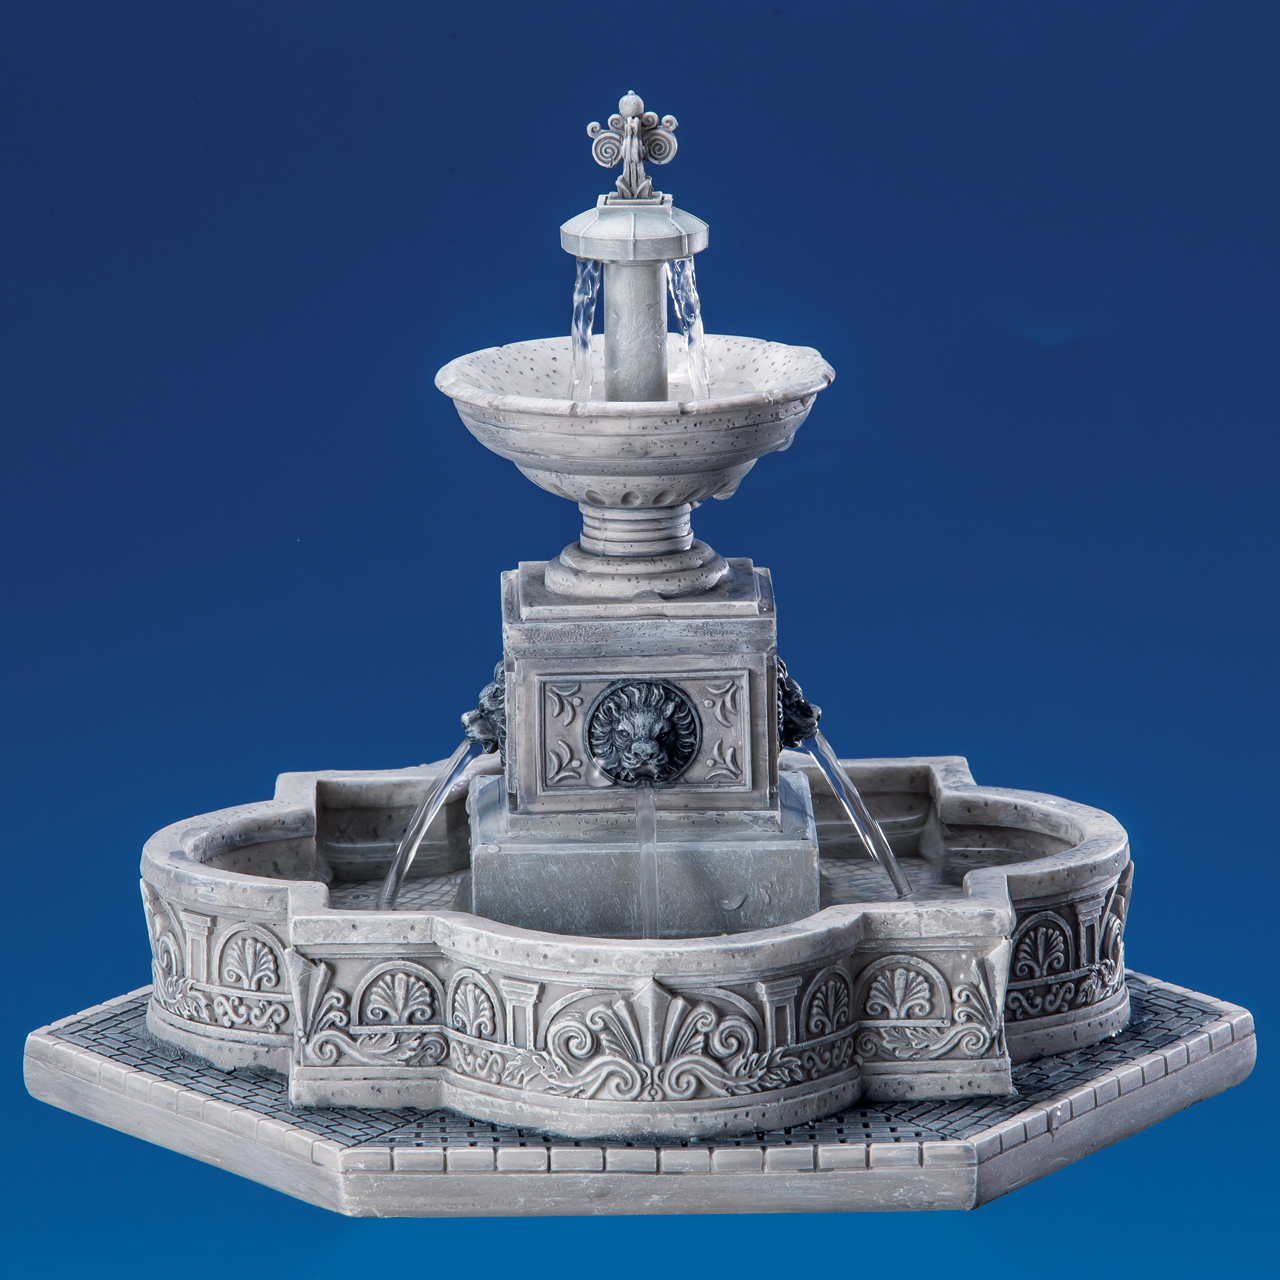 Add A Water Feature To Your Christmas Village